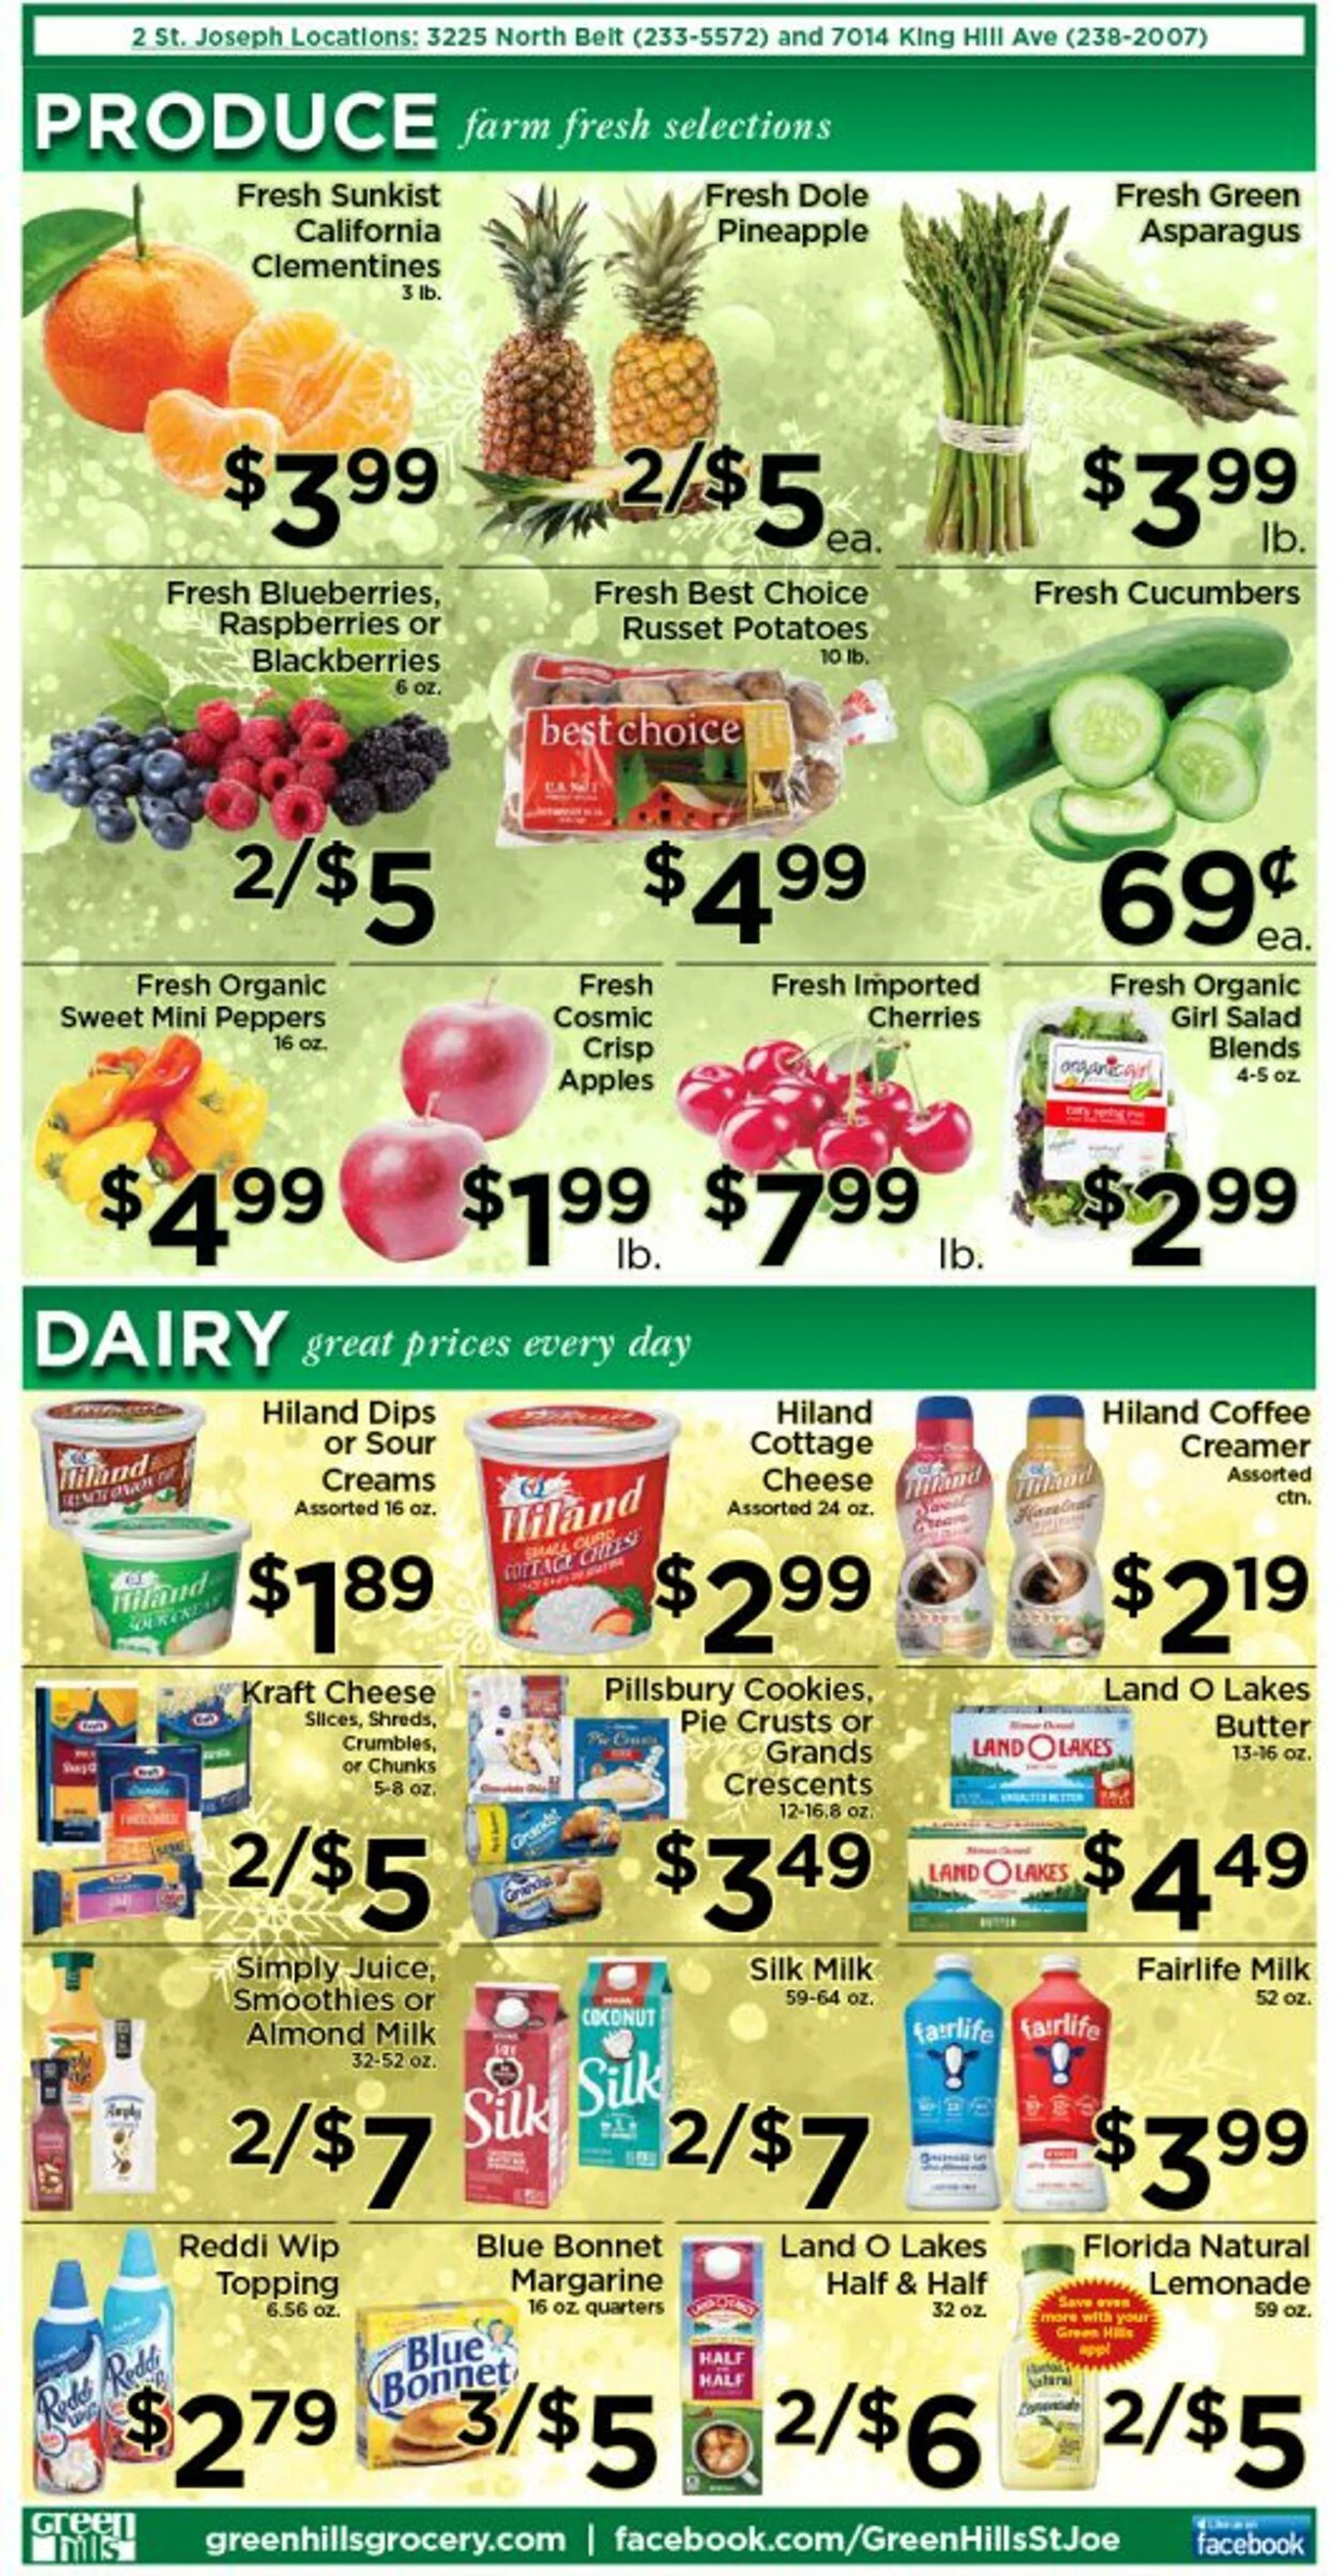 Green Hills Grocery Current weekly ad - 2